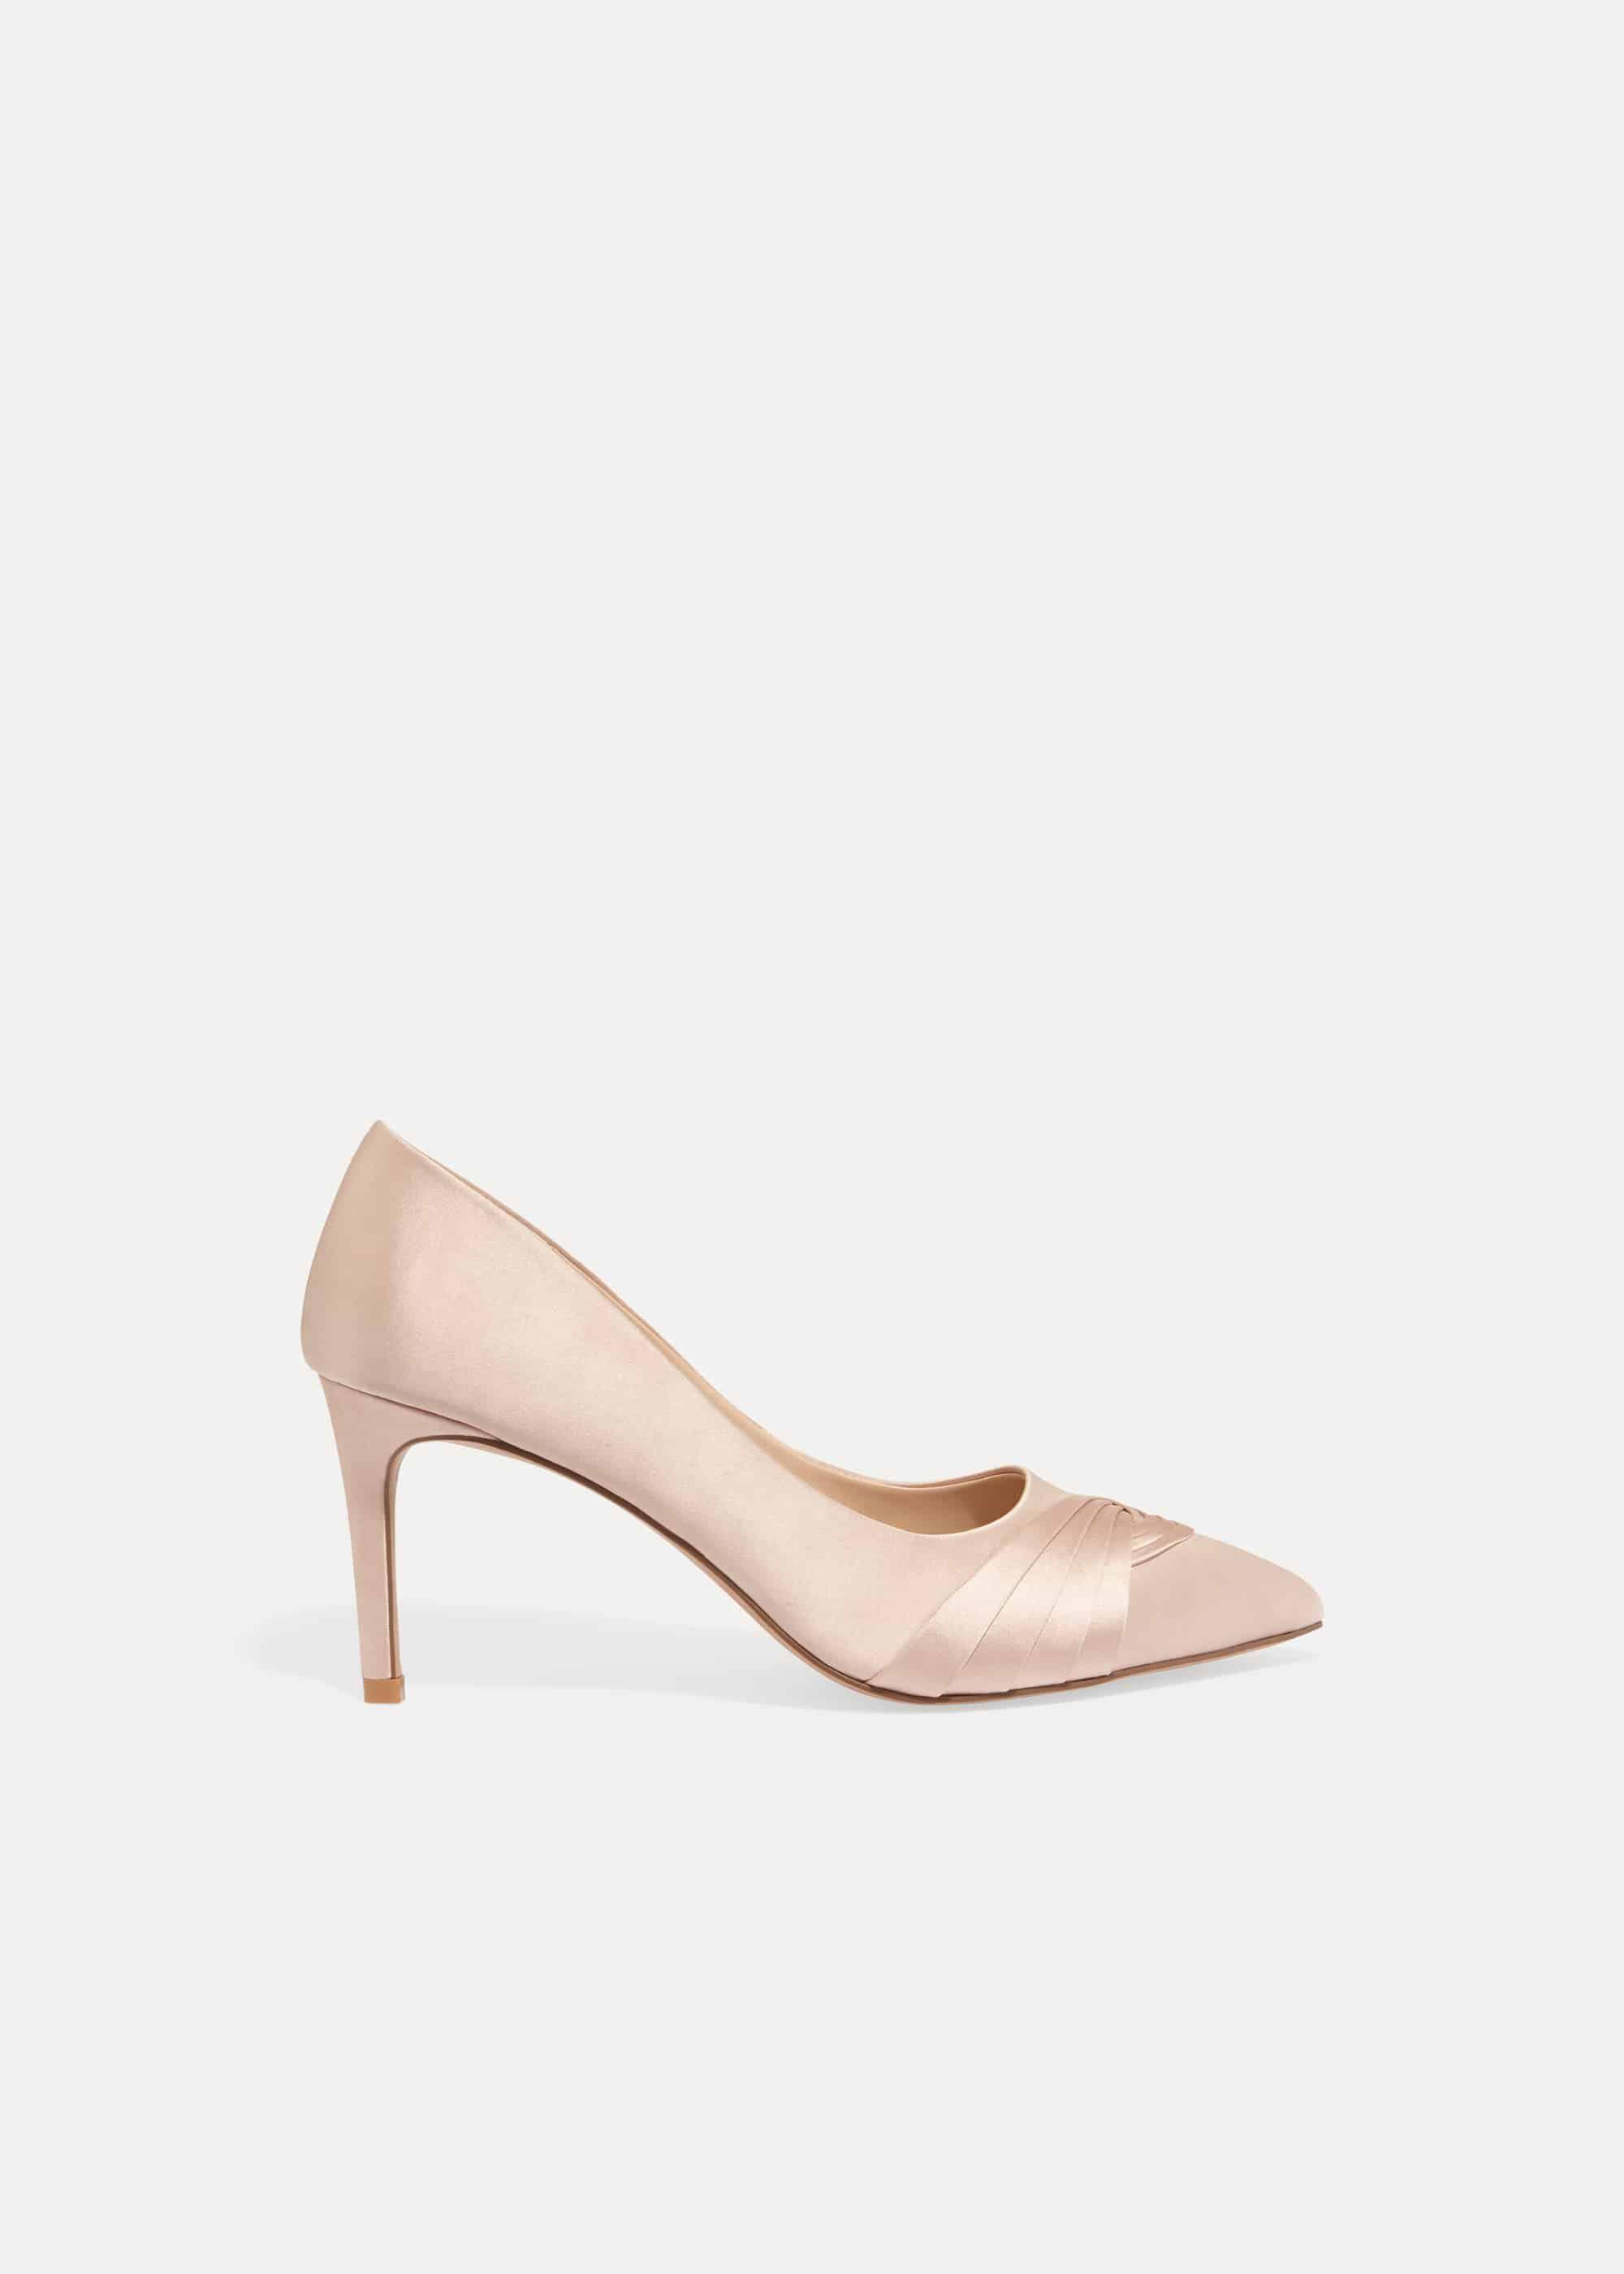 pink satin court shoes